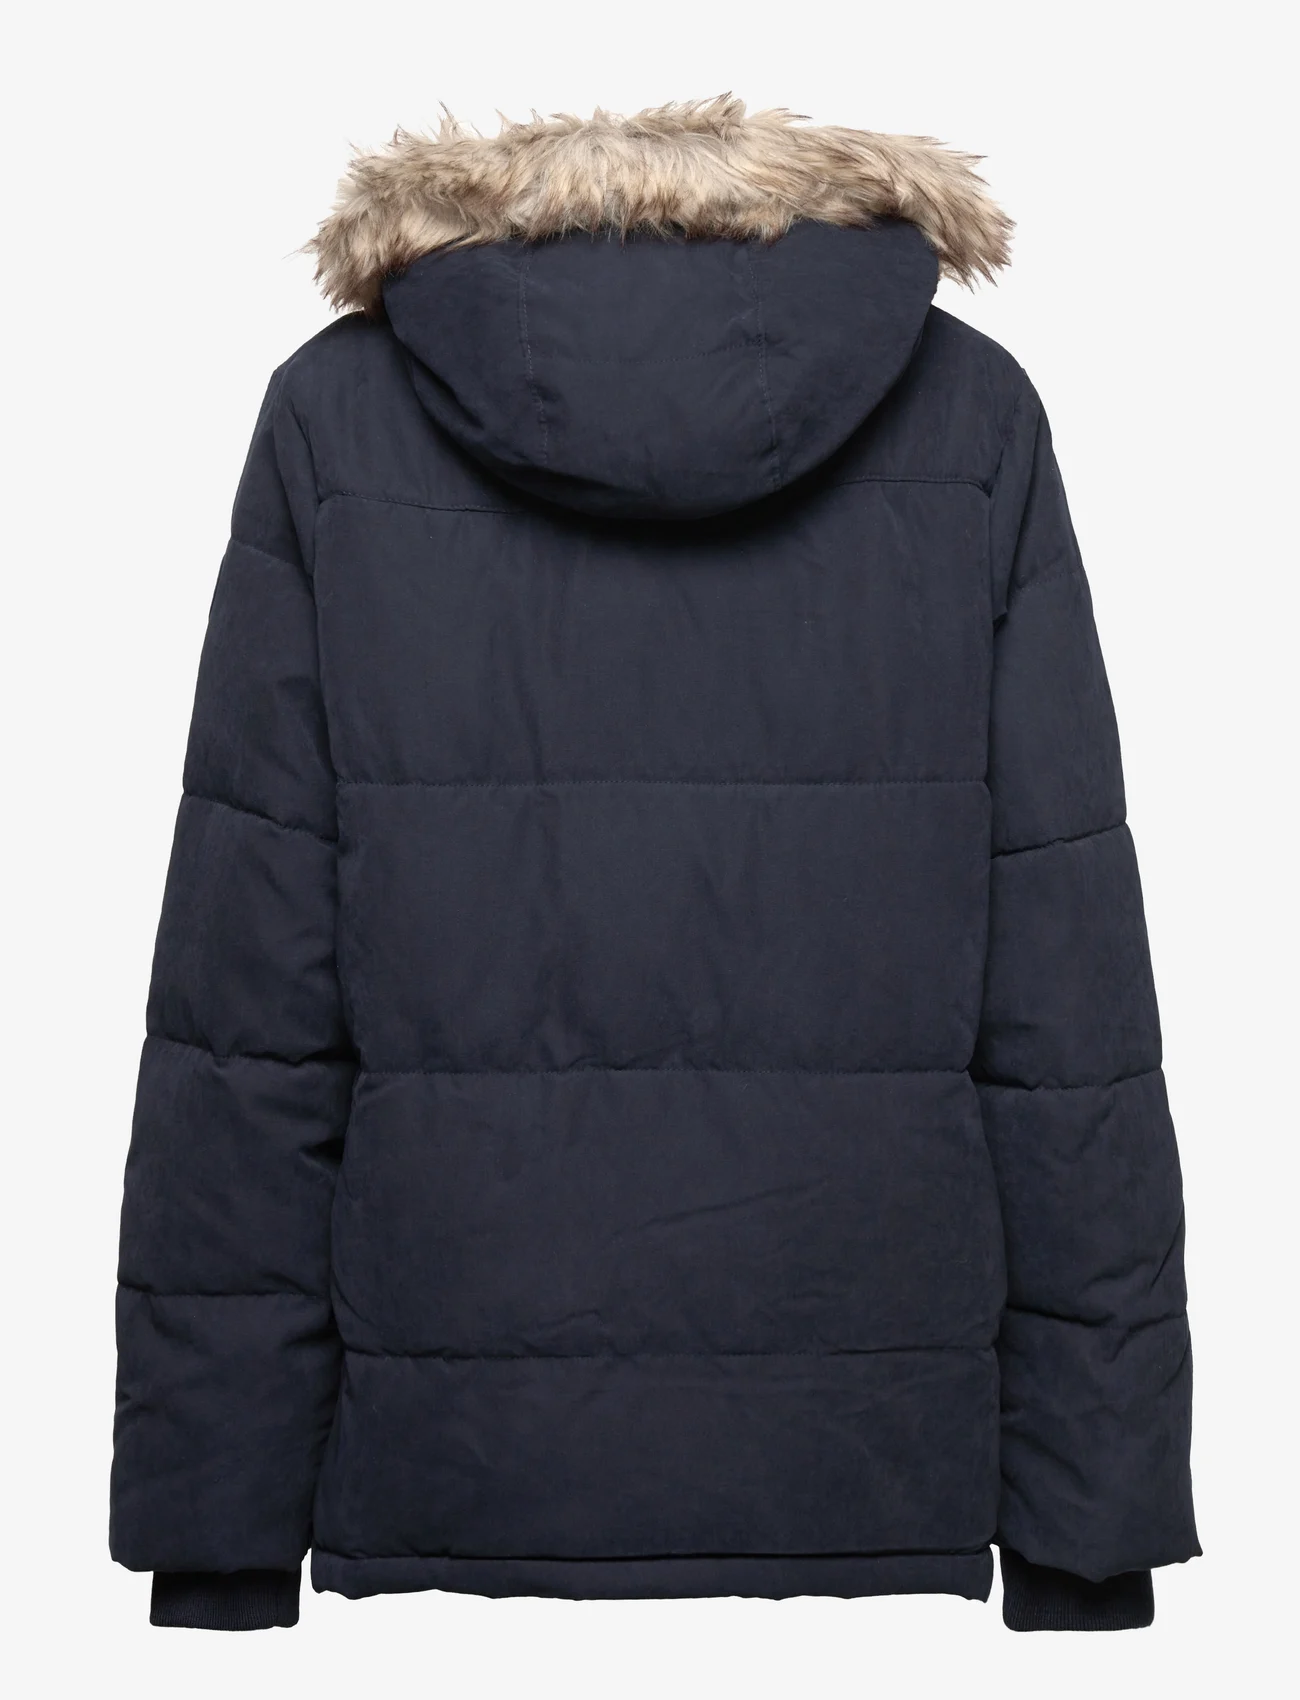 Abercrombie & Fitch - kids BOYS OUTERWEAR - parkad - navy - 1